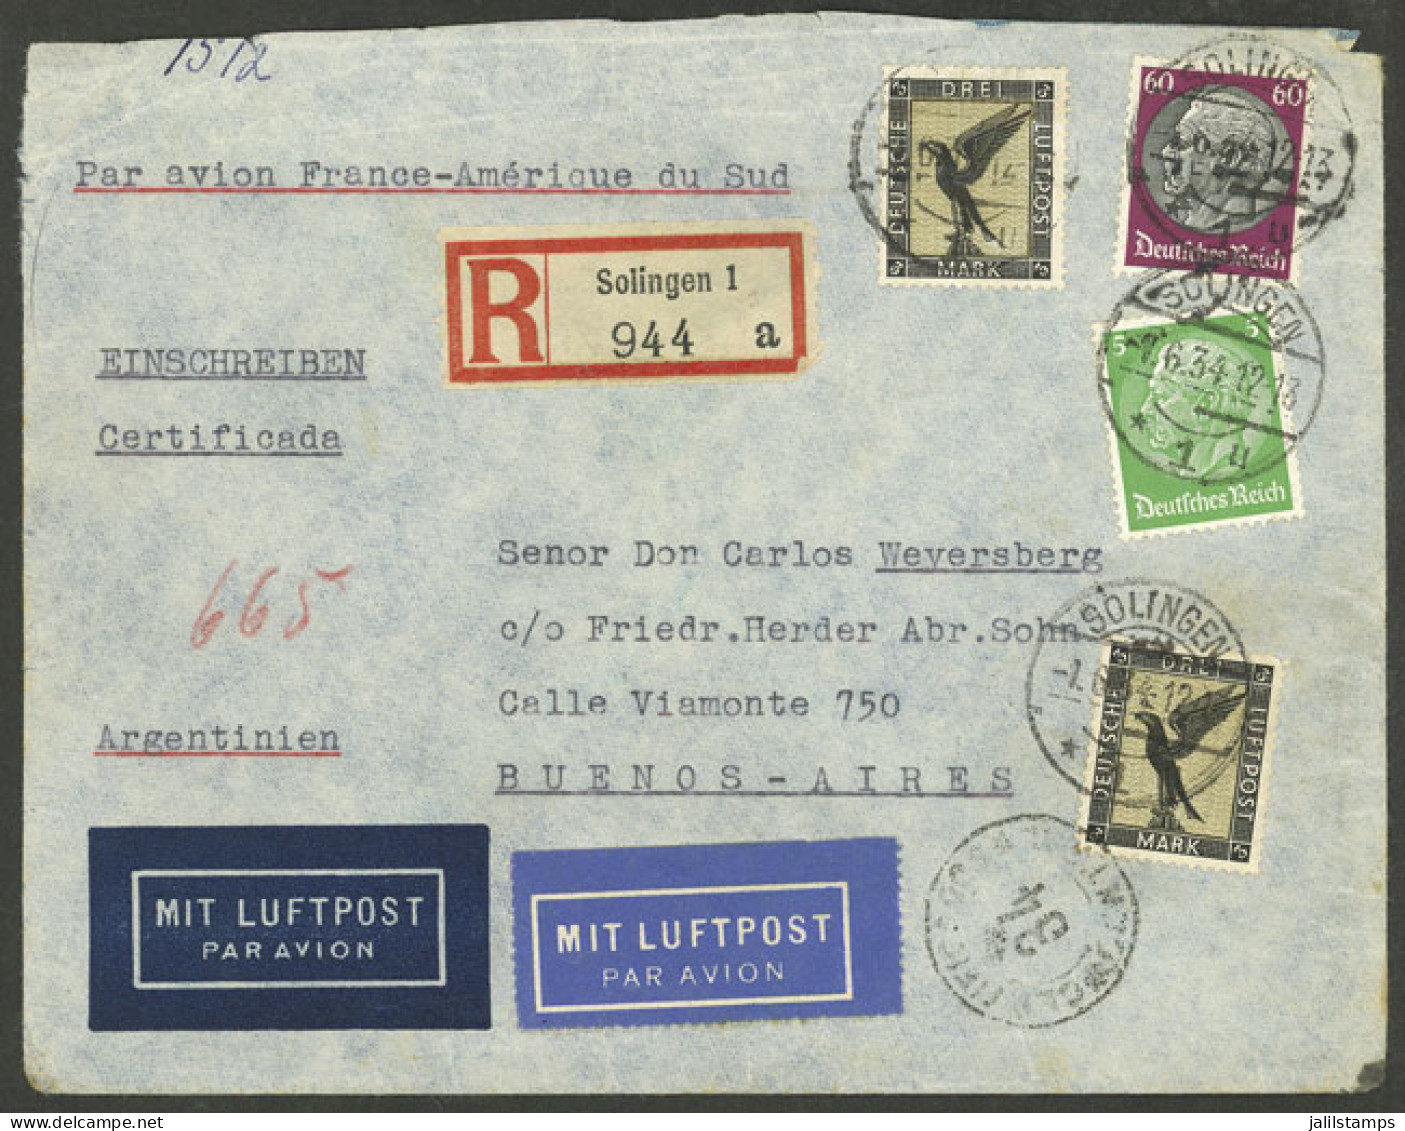 GERMANY: 1/JUN/1934 Solingen - Argentina, Registered Airmail Cover Sent Via Air France With Large Postage Of 6.65Mk., Bu - Covers & Documents